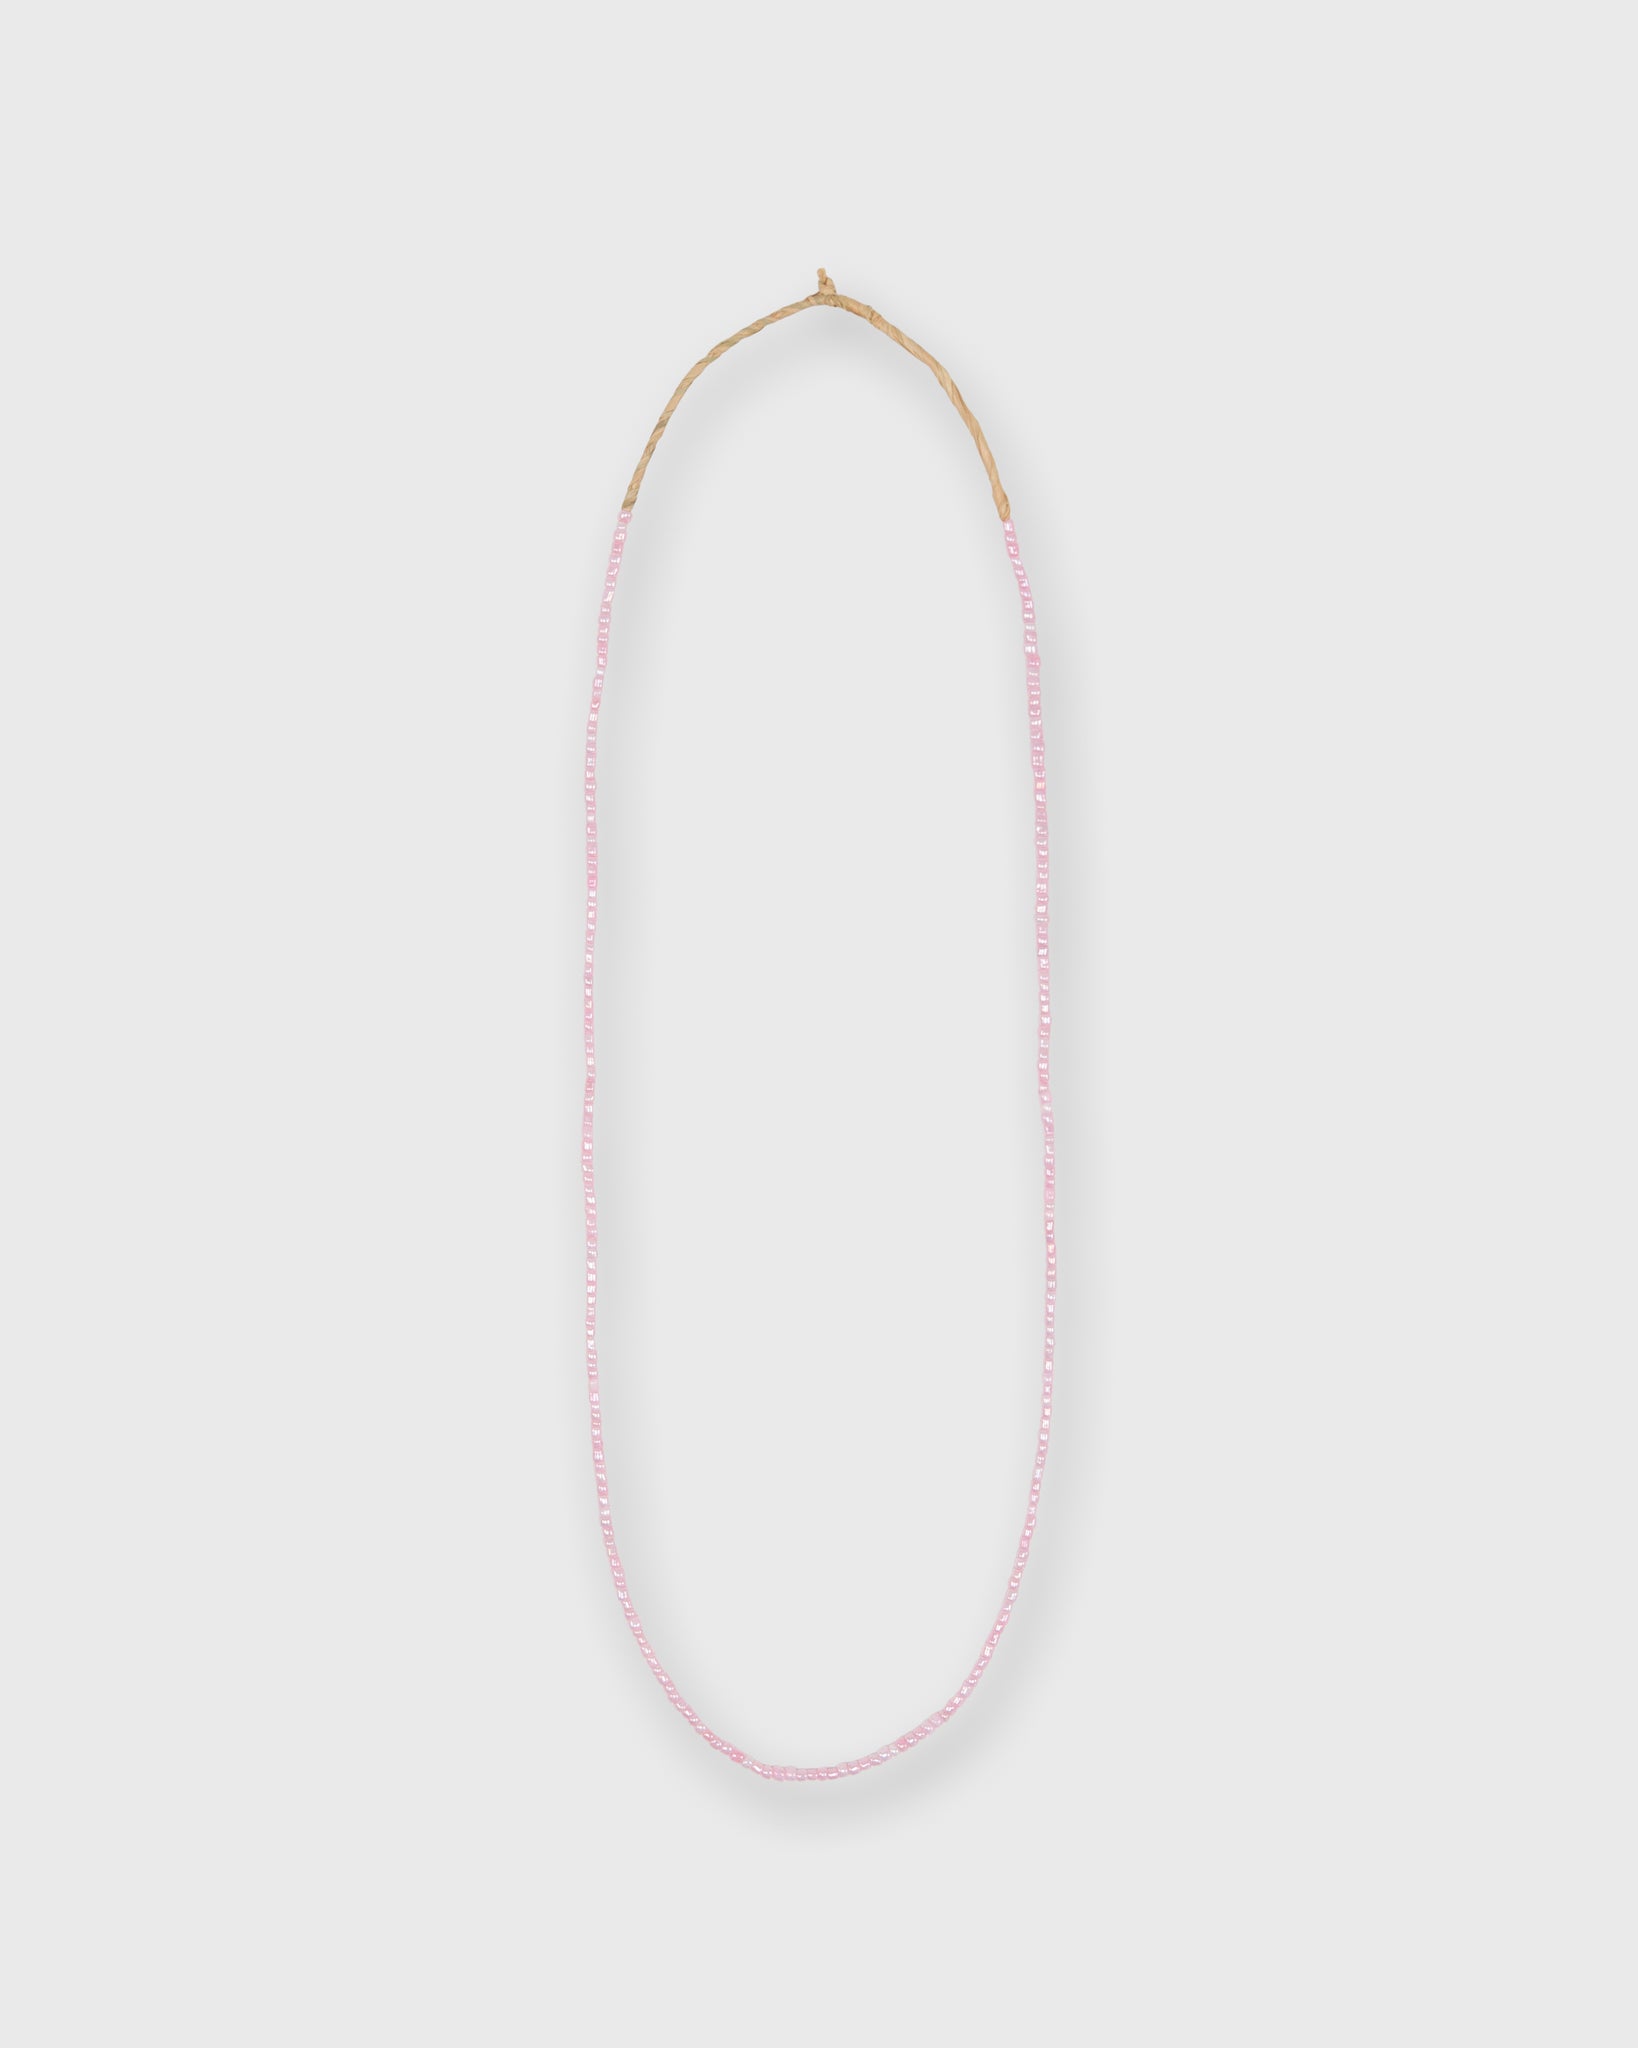 Tiny African Beads in Pink